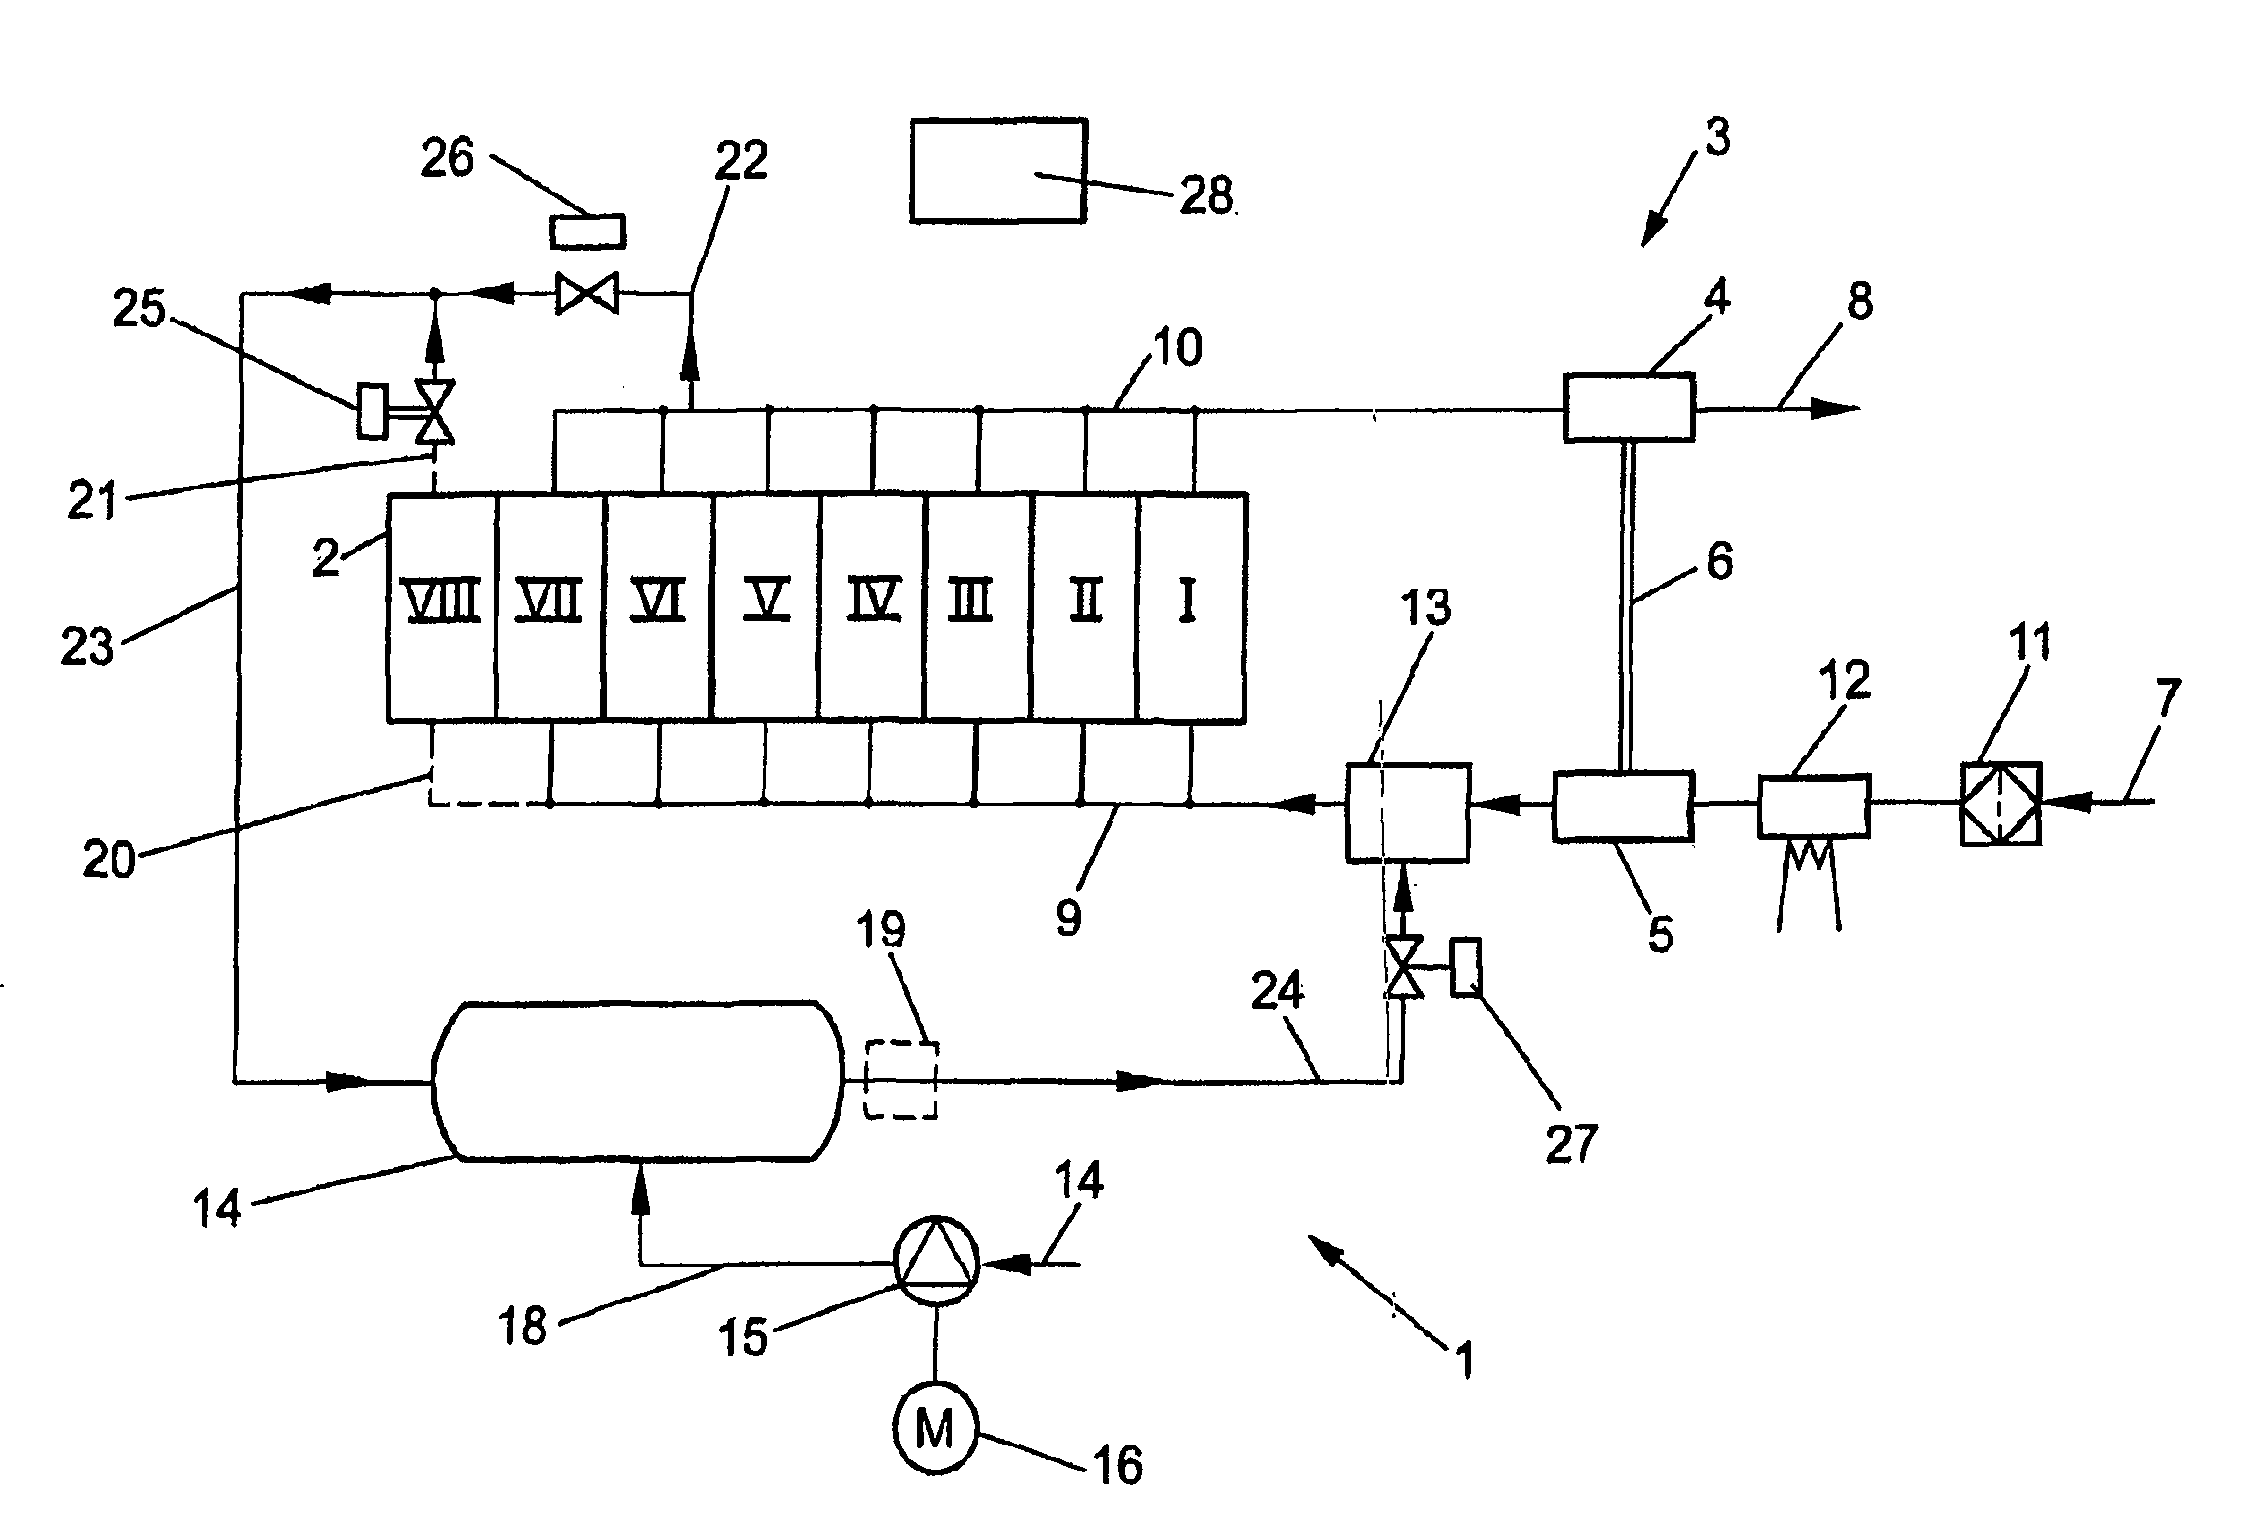 Method and Device for Generating Compressed Air and for Blowing it into an Internal Combustion Engine